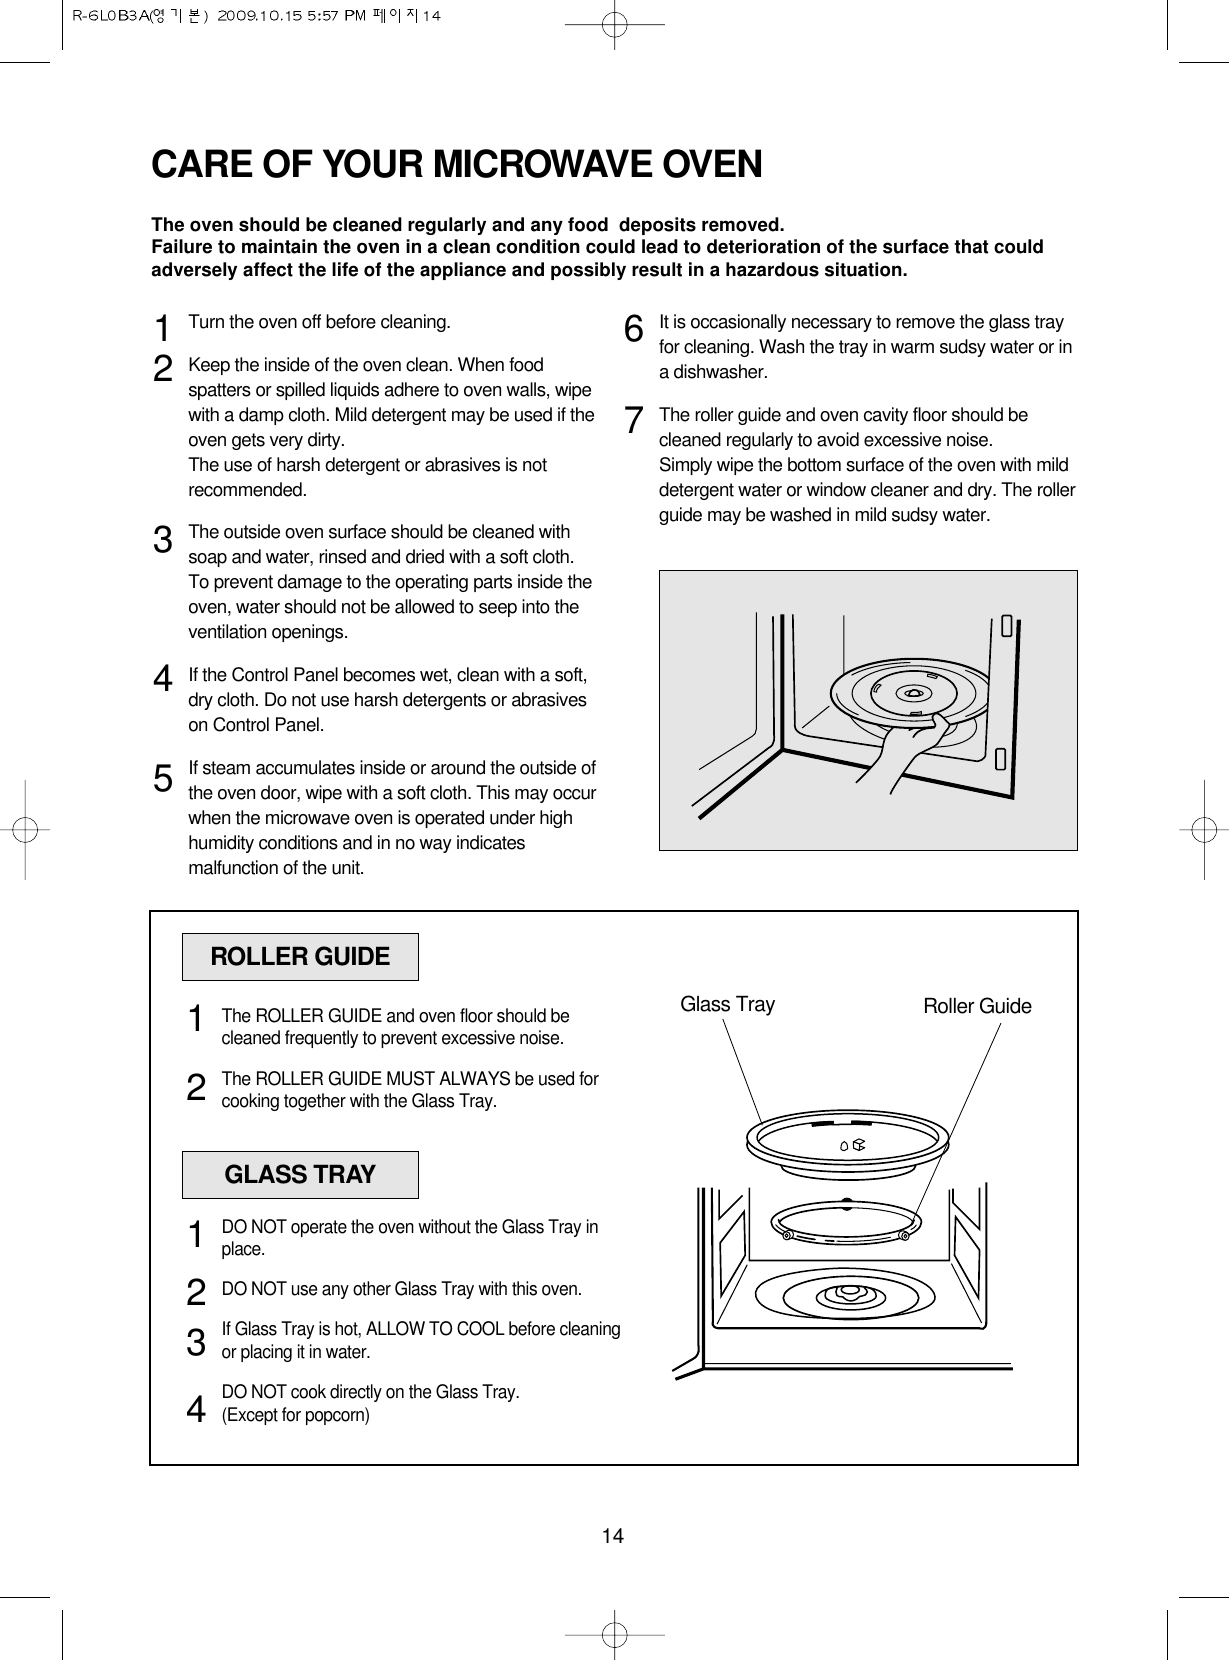 14CARE OF YOUR MICROWAVE OVENTurn the oven off before cleaning.Keep the inside of the oven clean. When foodspatters or spilled liquids adhere to oven walls, wipewith a damp cloth. Mild detergent may be used if theoven gets very dirty. The use of harsh detergent or abrasives is notrecommended.The outside oven surface should be cleaned withsoap and water, rinsed and dried with a soft cloth.To prevent damage to the operating parts inside theoven, water should not be allowed to seep into theventilation openings.If the Control Panel becomes wet, clean with a soft,dry cloth. Do not use harsh detergents or abrasiveson Control Panel.If steam accumulates inside or around the outside ofthe oven door, wipe with a soft cloth. This may occurwhen the microwave oven is operated under highhumidity conditions and in no way indicatesmalfunction of the unit.It is occasionally necessary to remove the glass trayfor cleaning. Wash the tray in warm sudsy water or ina dishwasher.The roller guide and oven cavity floor should becleaned regularly to avoid excessive noise. Simply wipe the bottom surface of the oven with milddetergent water or window cleaner and dry. The rollerguide may be washed in mild sudsy water.1234567ROLLER GUIDEGlass Tray Roller GuideThe ROLLER GUIDE and oven floor should becleaned frequently to prevent excessive noise.The ROLLER GUIDE MUST ALWAYS be used forcooking together with the Glass Tray.12GLASS TRAYDO NOT operate the oven without the Glass Tray inplace.DO NOT use any other Glass Tray with this oven.If Glass Tray is hot, ALLOW TO COOL before cleaningor placing it in water.DO NOT cook directly on the Glass Tray.(Except for popcorn)1234The oven should be cleaned regularly and any food  deposits removed.Failure to maintain the oven in a clean condition could lead to deterioration of the surface that couldadversely affect the life of the appliance and possibly result in a hazardous situation.